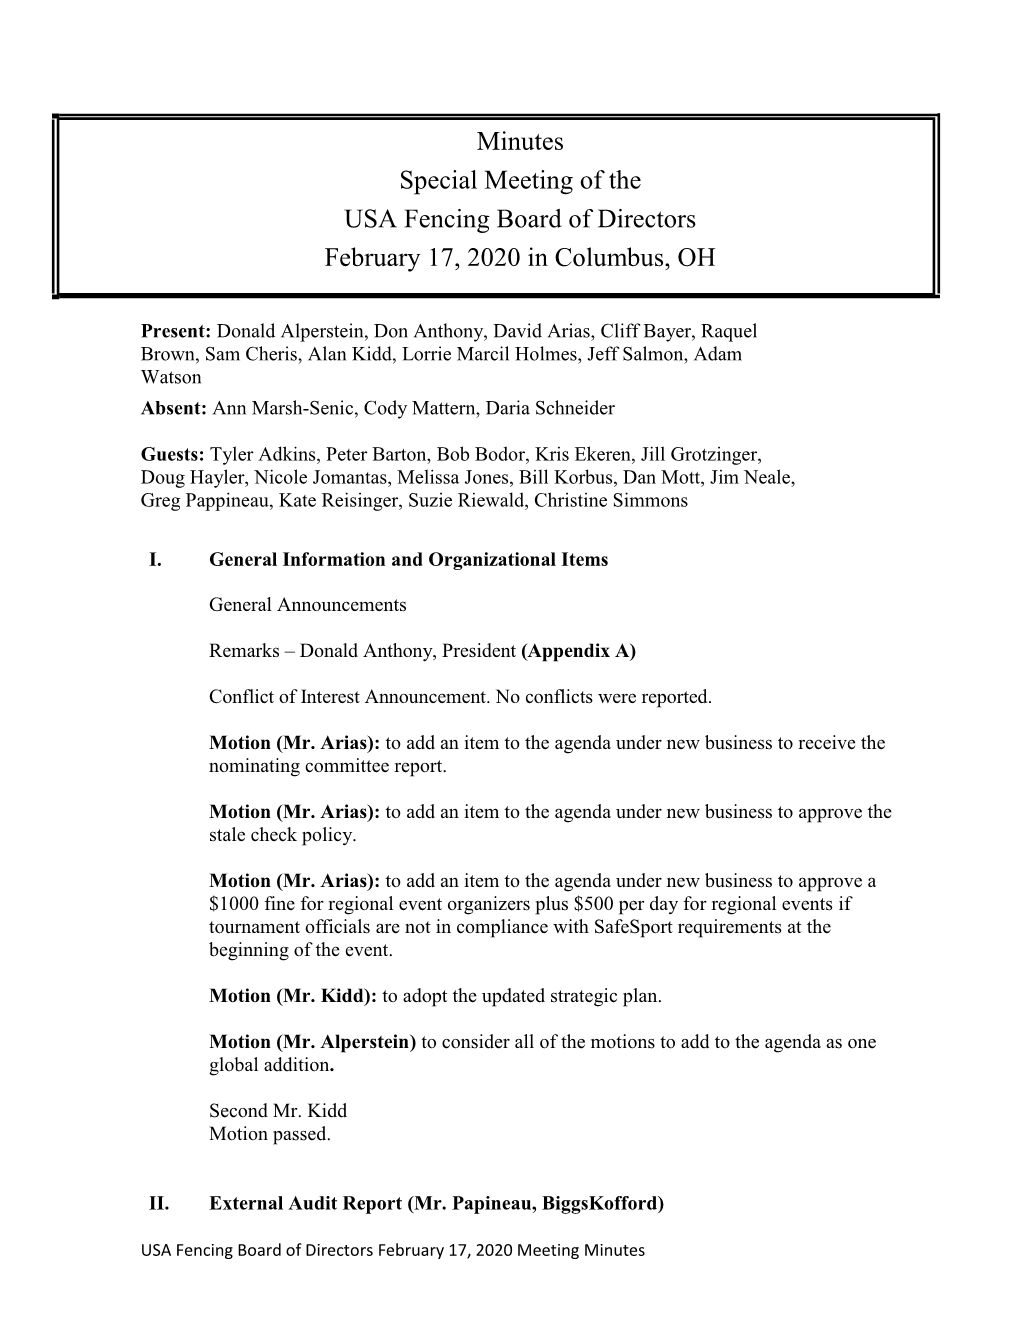 Minutes Special Meeting of the USA Fencing Board of Directors February 17, 2020 in Columbus, OH